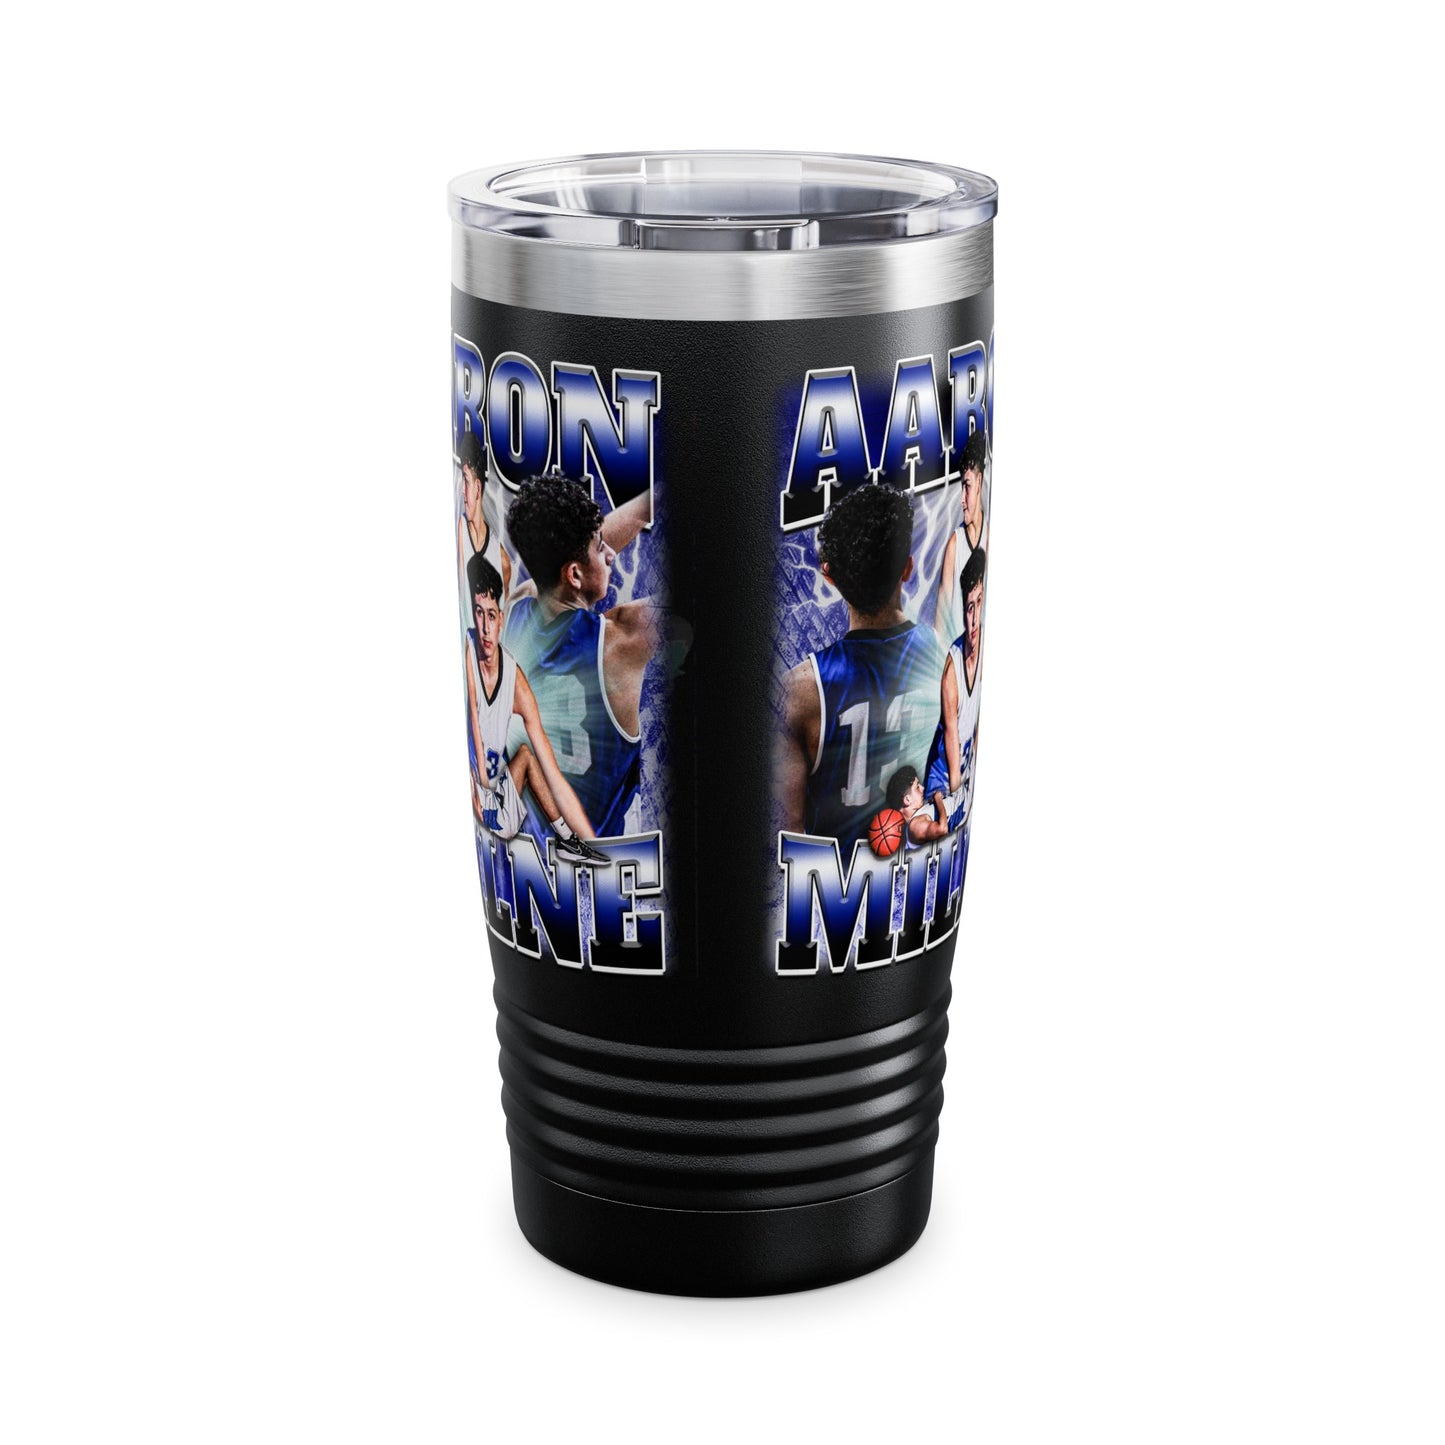 Aaron Milne Stainless Steal Tumbler